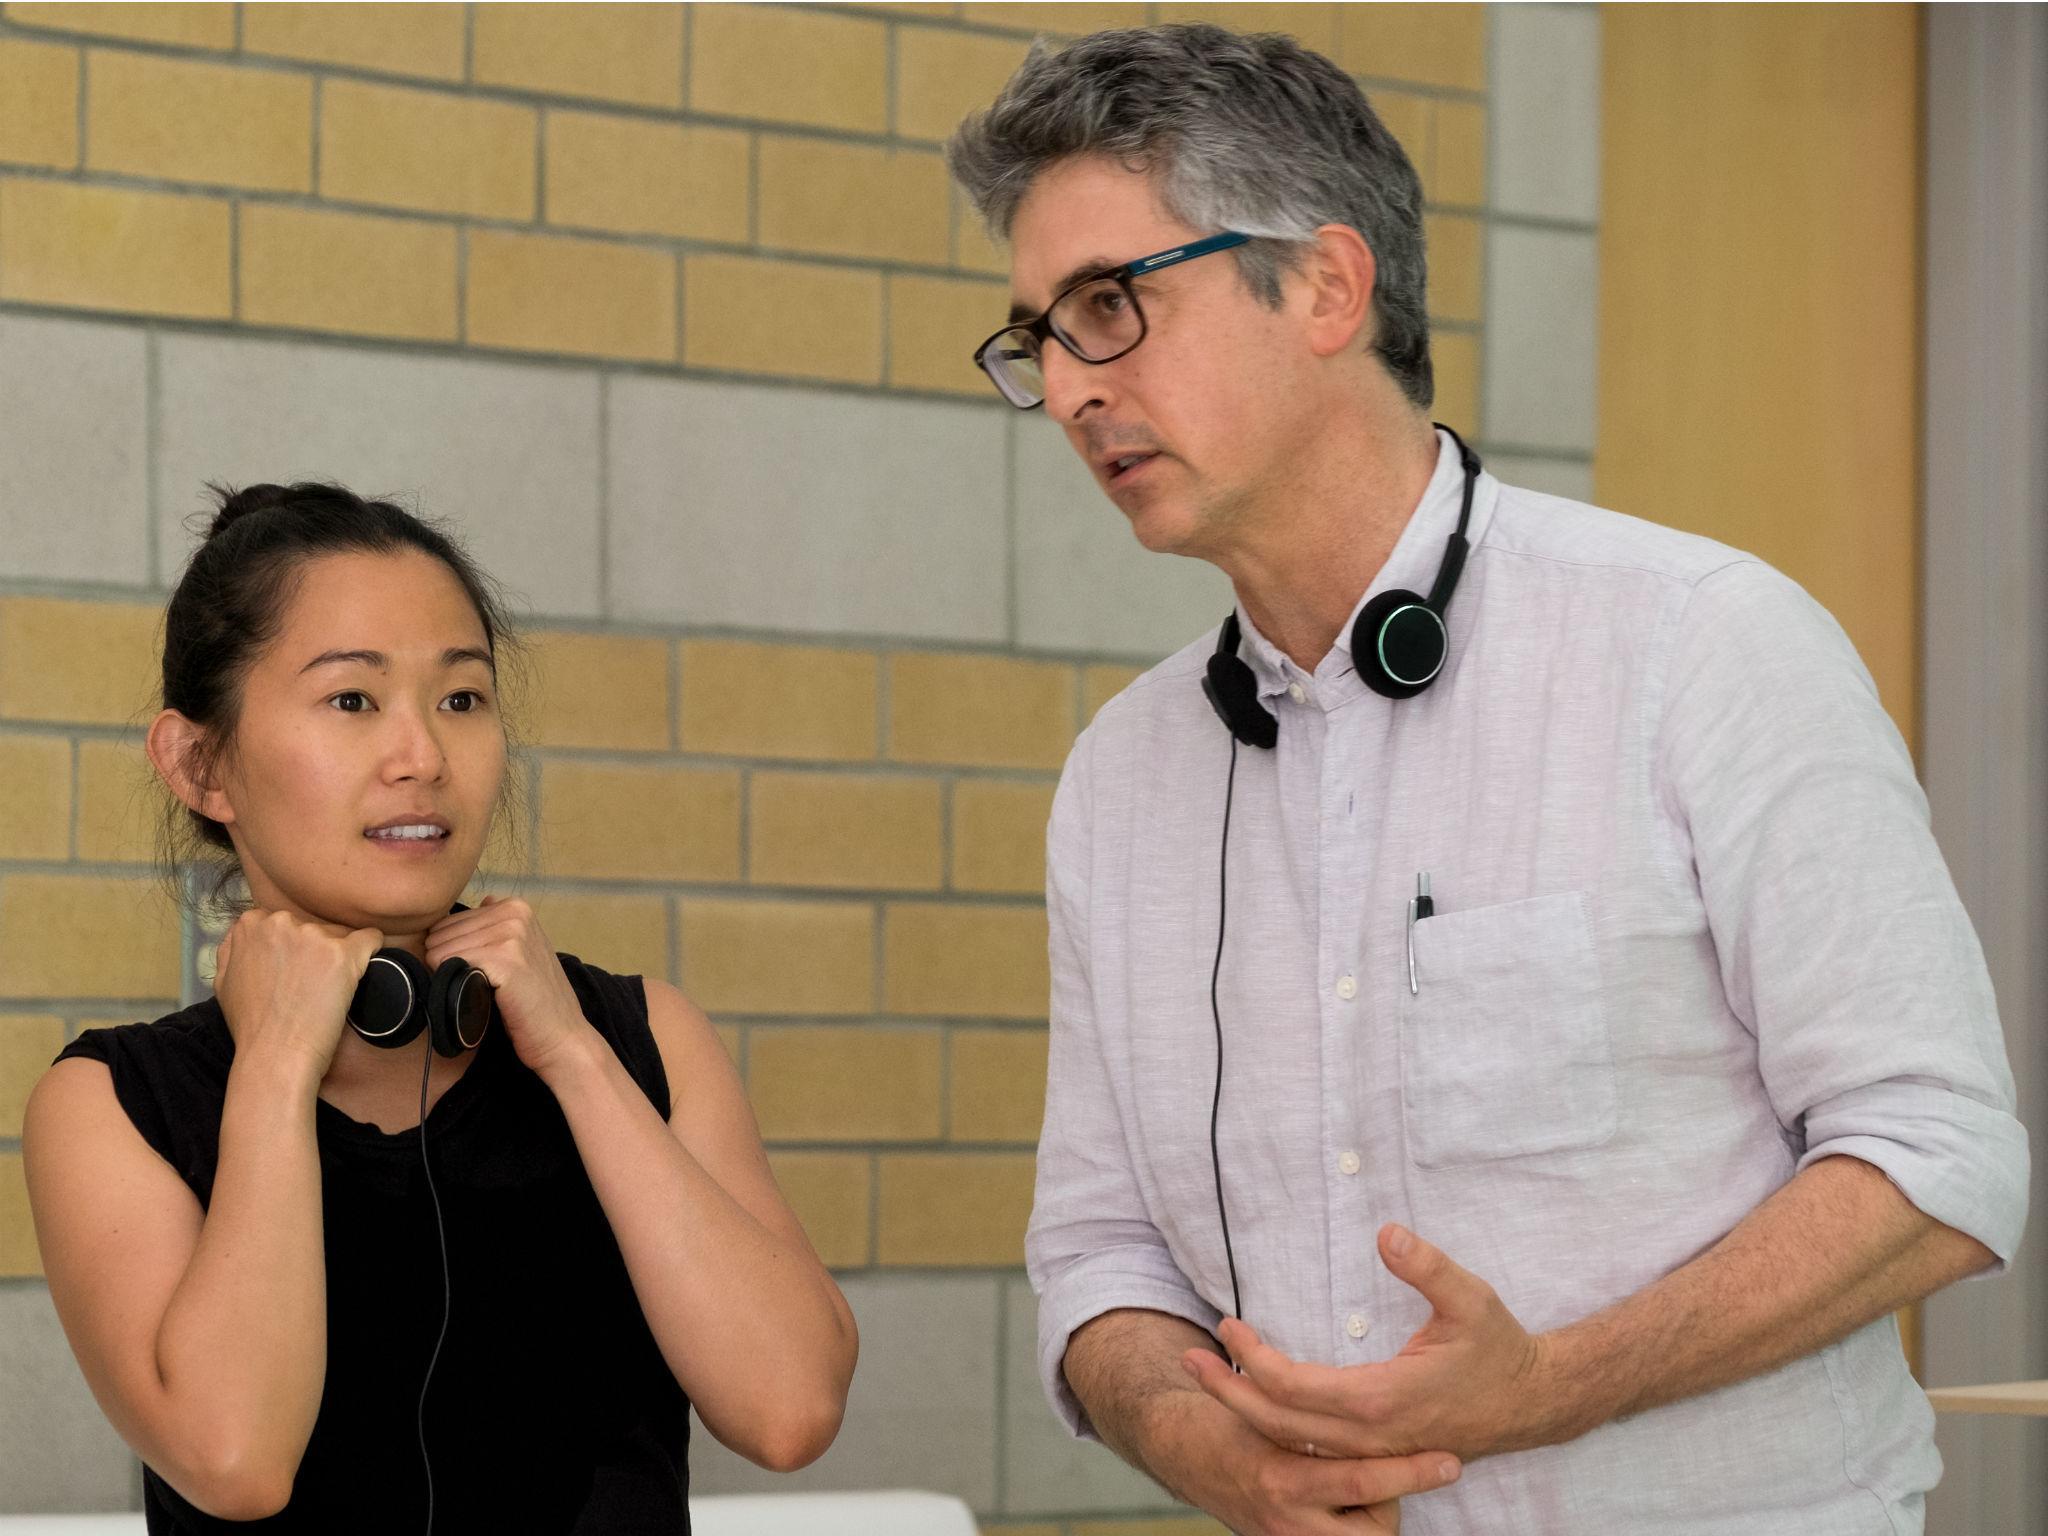 Hong Chau and director Alexander Payne on the set of ‘Downsizing’. ‘I’ve seen all of his previous films,’ she gushes. ‘I’m a huge fan of his’